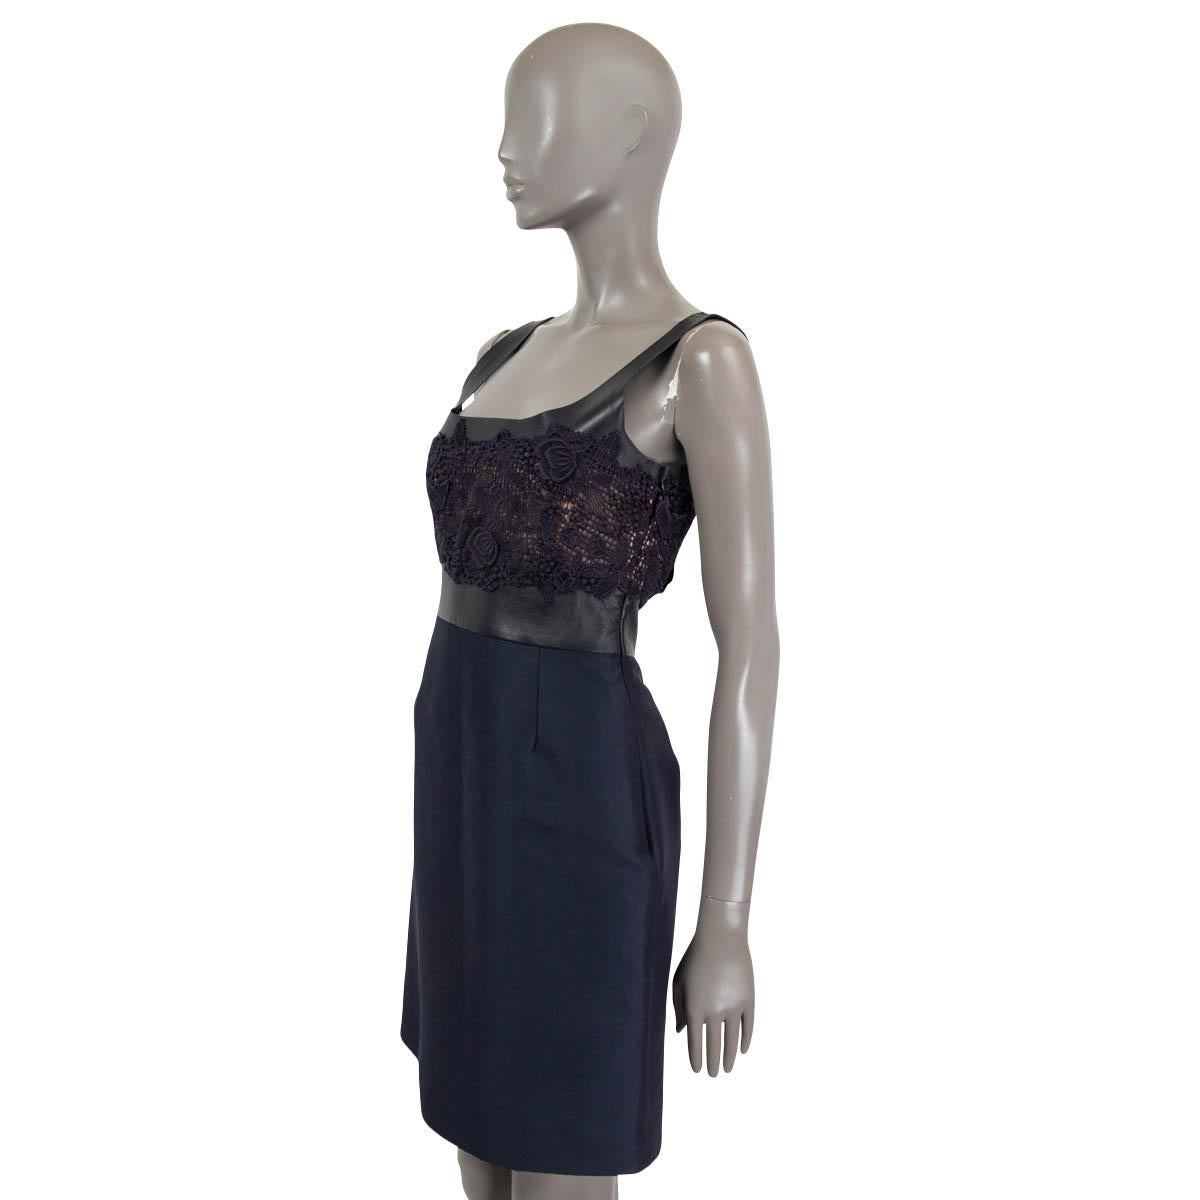 100% authentic Valentino knee-length fit and flare dress in midnight blue silk (100%). Features a lace top with nude lining and leather waistband. Closes with a concealed zipper on the side. Has been worn and is in excellent